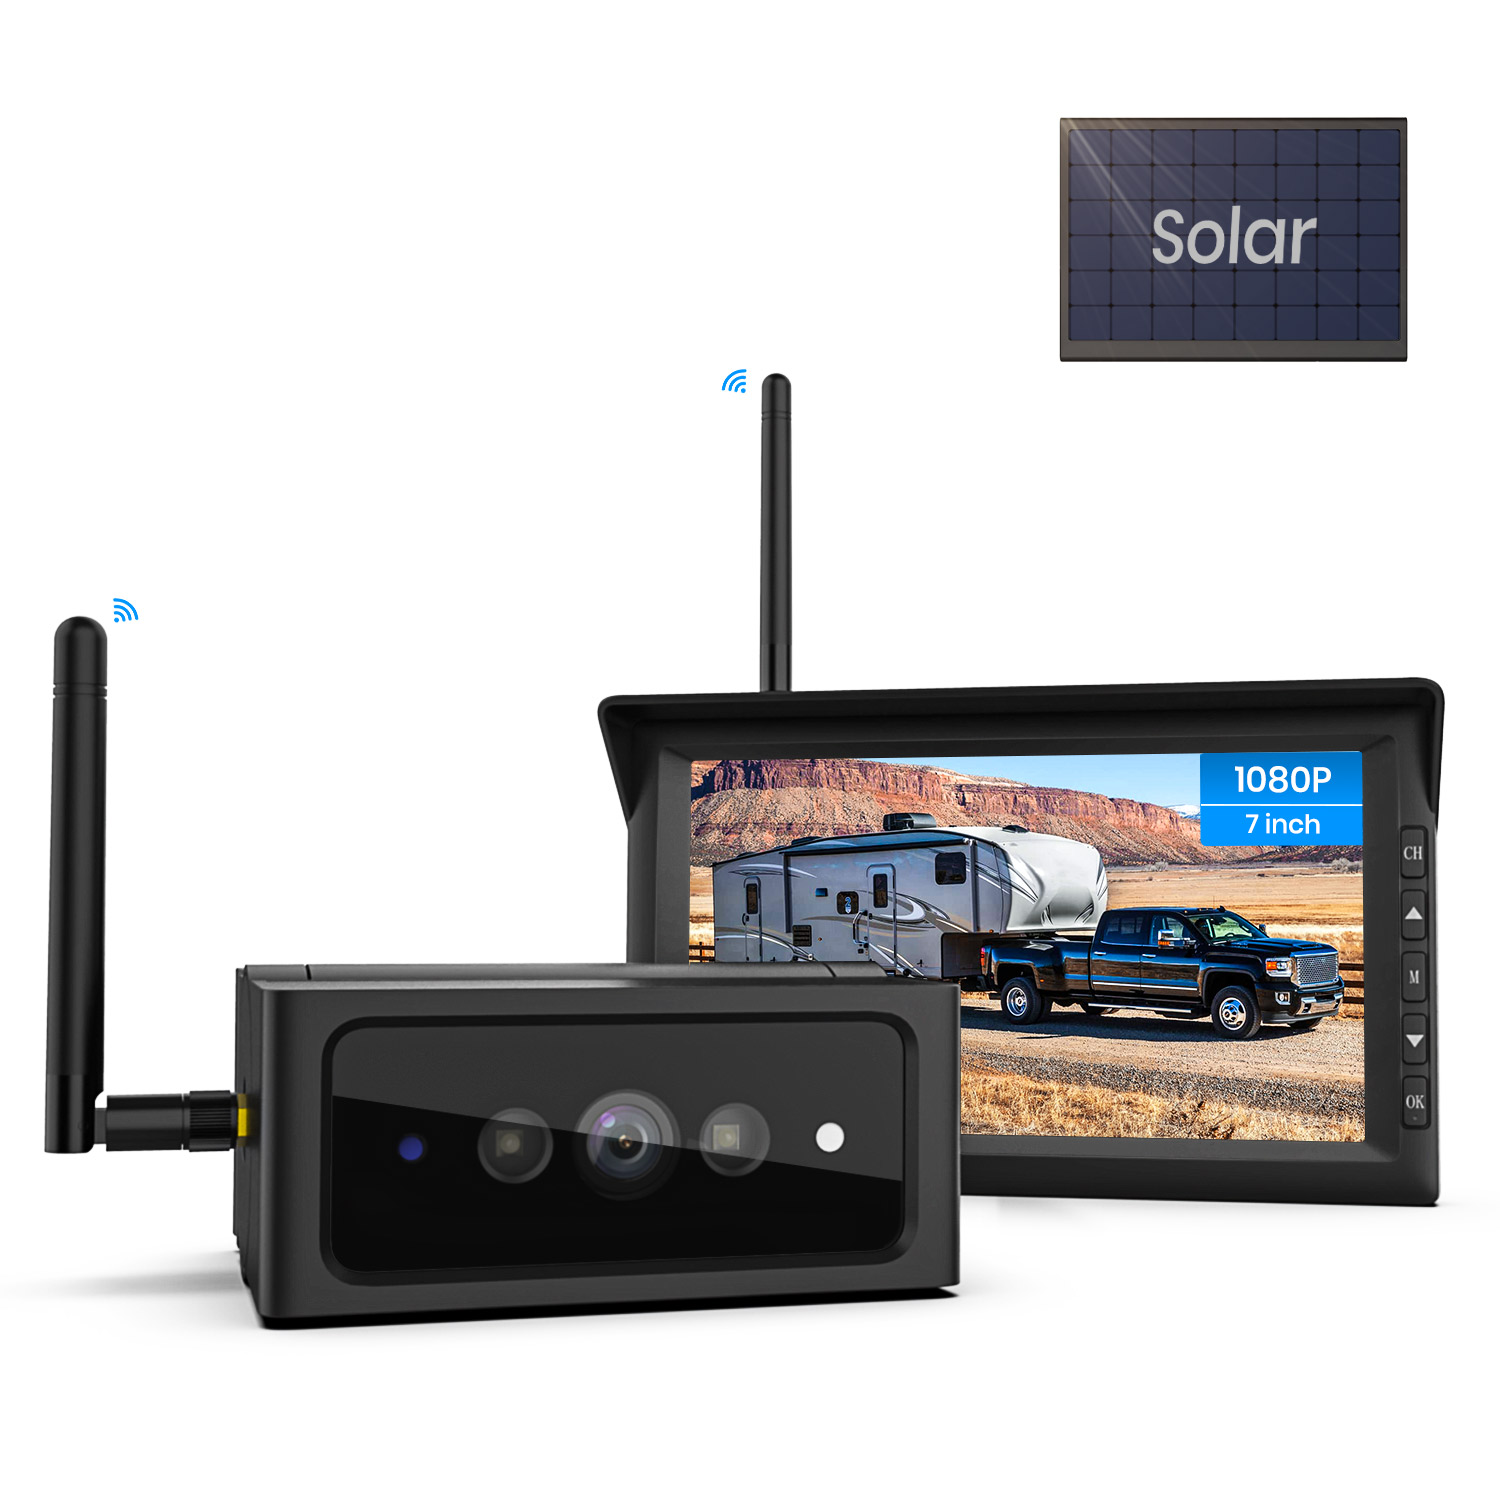 AUTO-VOX Soalr4 Wireless Backup Camera for RV/Truck/Travel Trailer/Camper Van, Powered by by the Sun, 10Mins DIY Installation